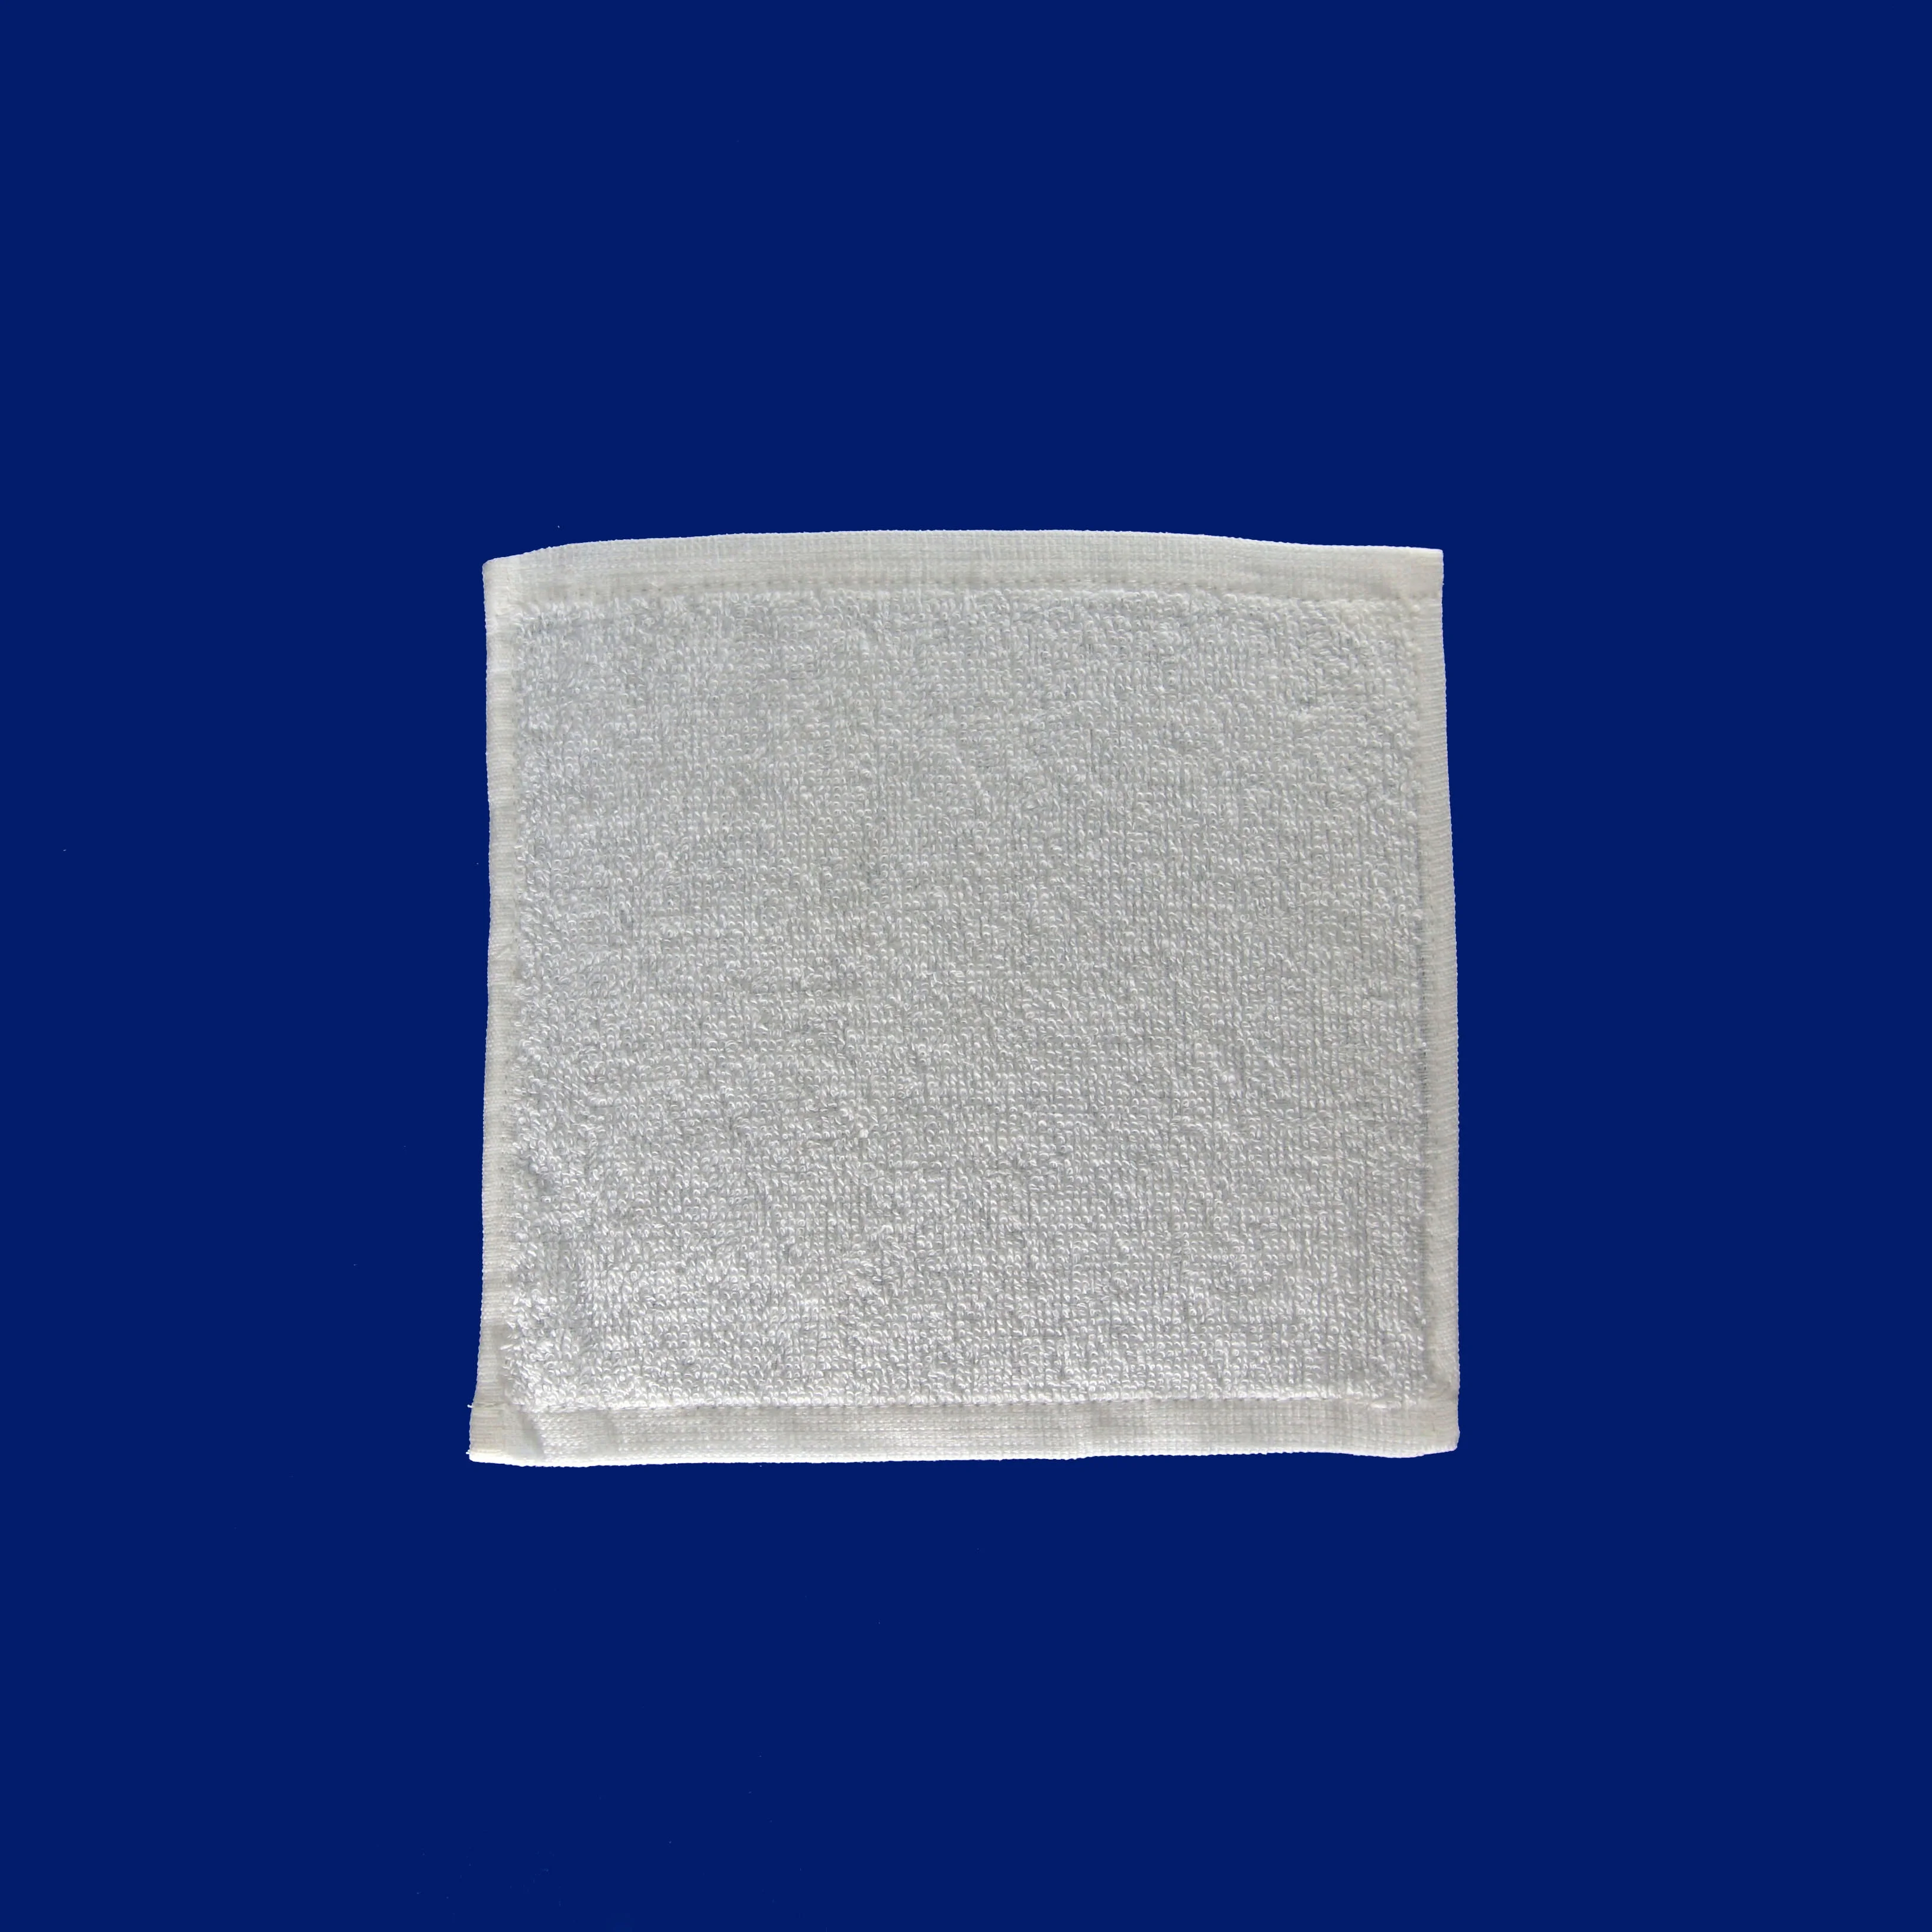 bleach mini disposable hot and cold face towel for airline